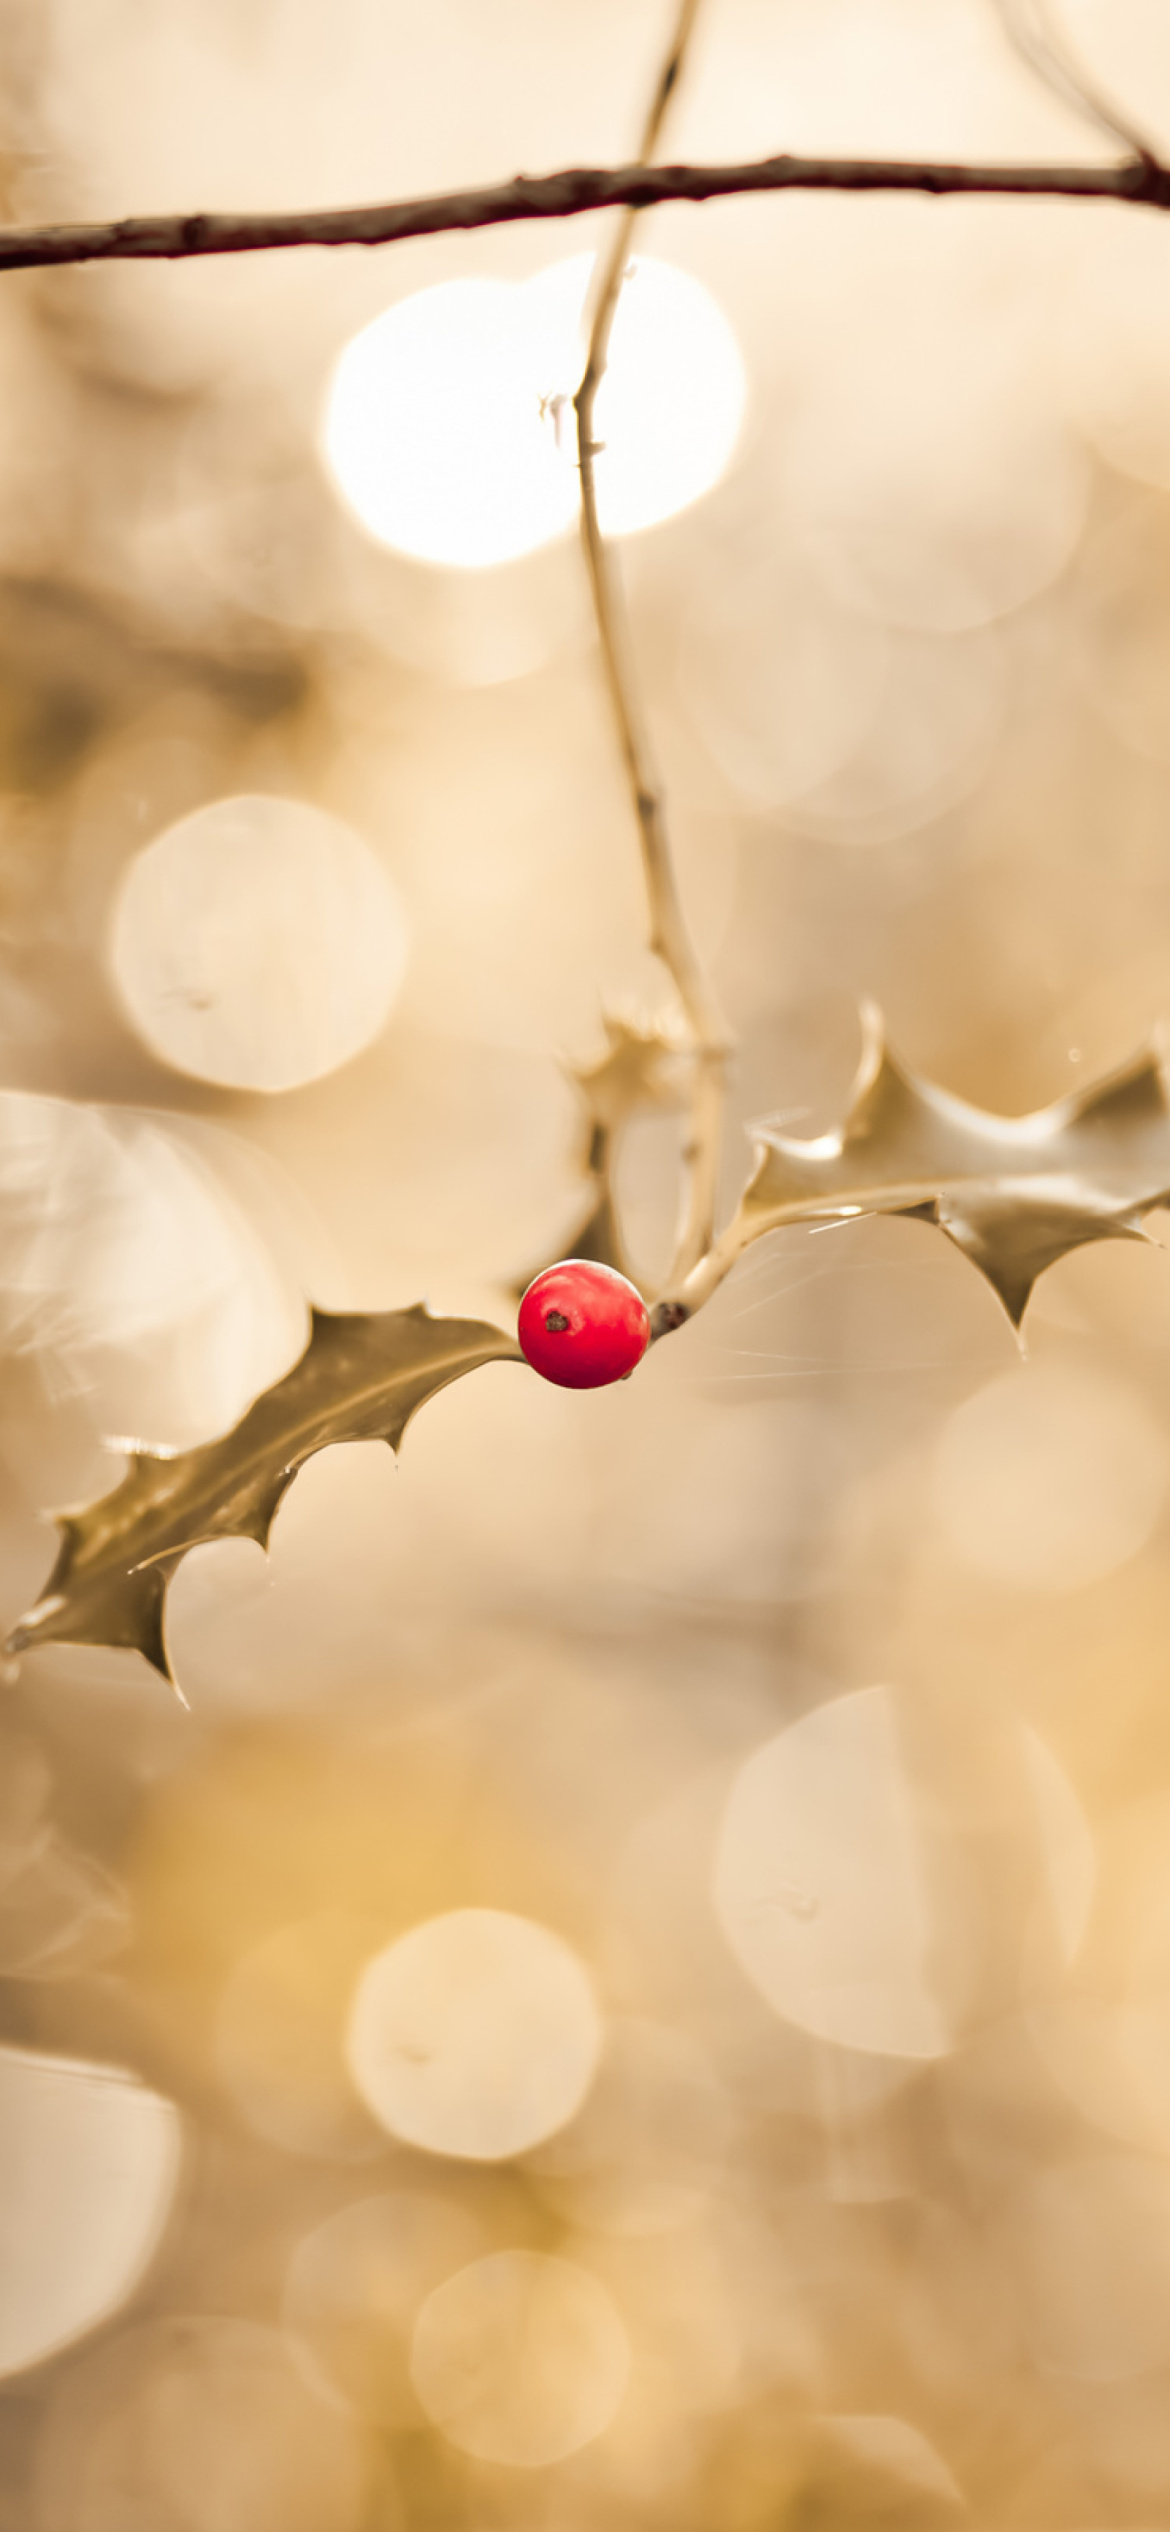 Frosted Berries wallpaper 1170x2532